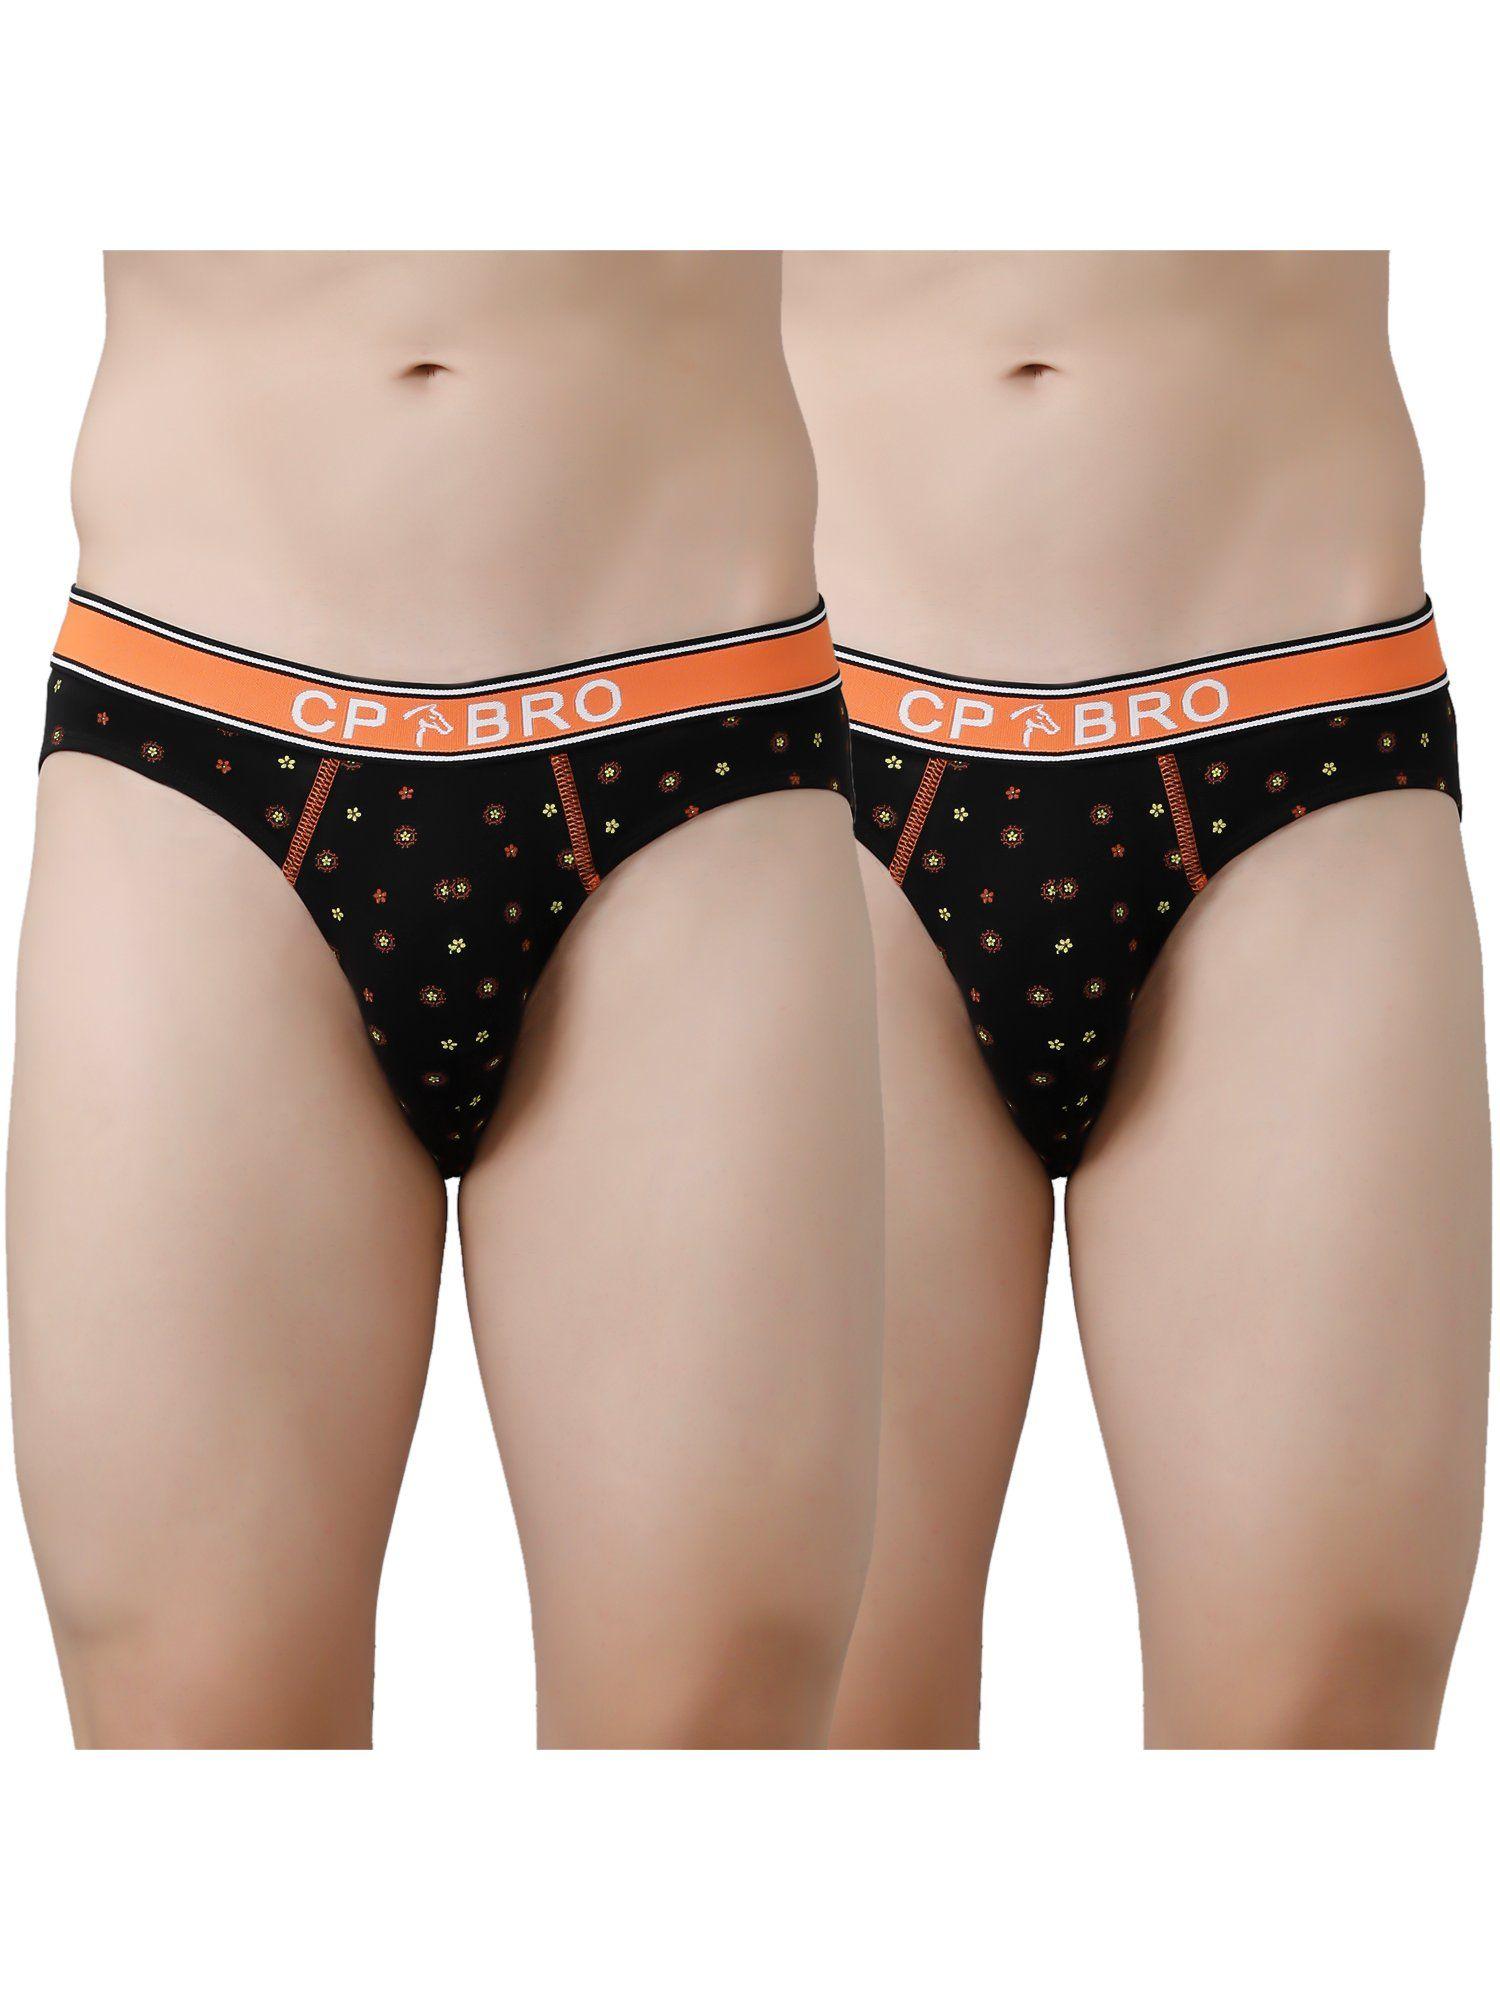 printed briefs with exposed waistband value - black dot (pack of 2)